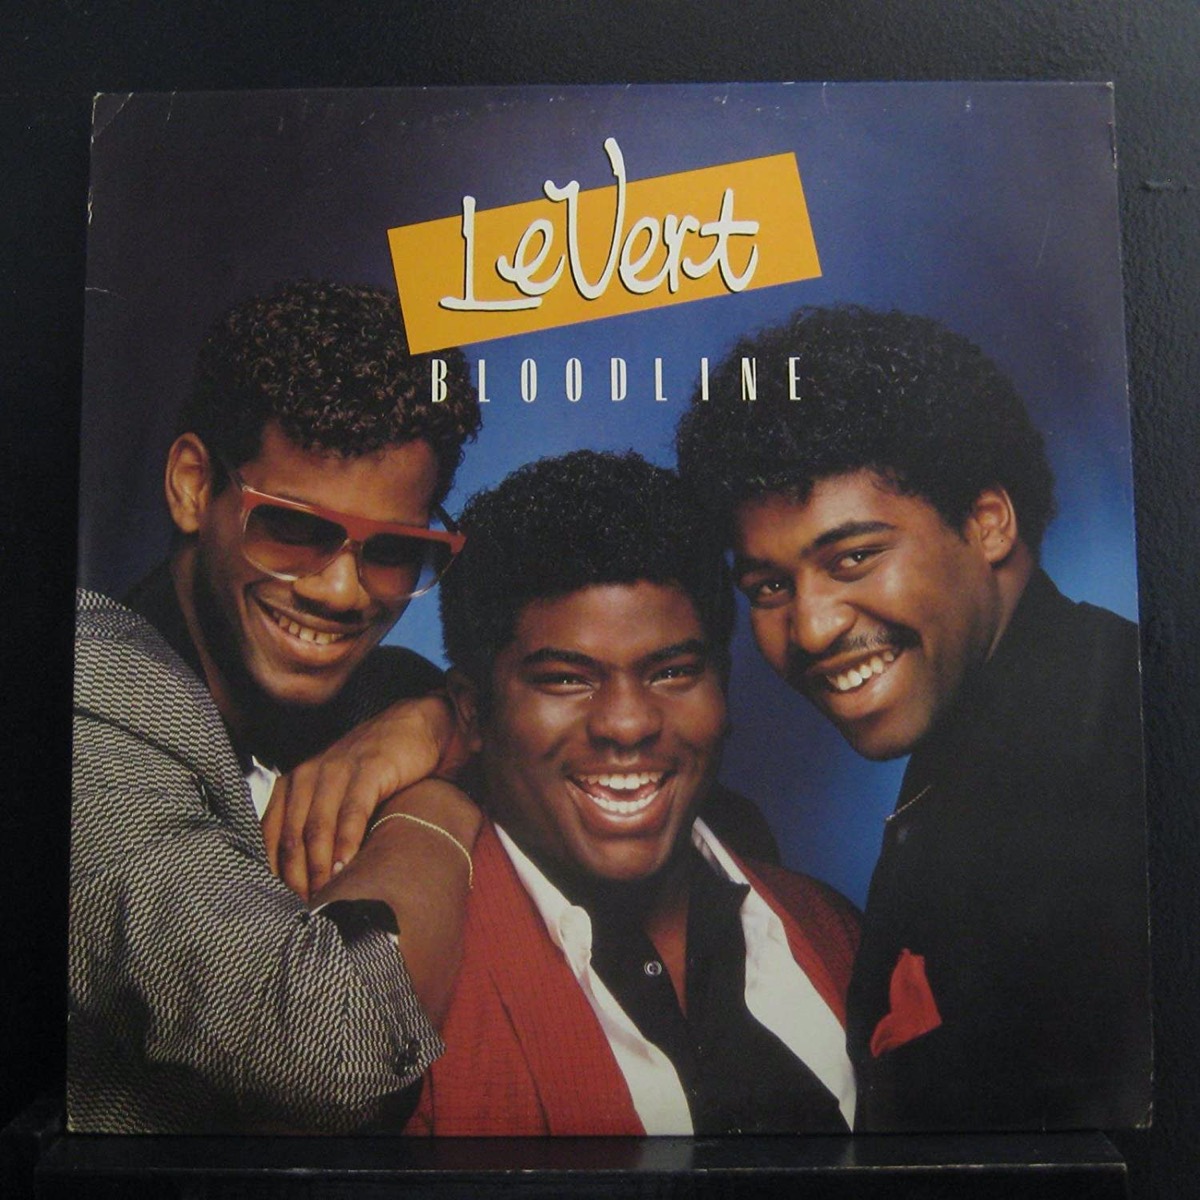 album cover of bloodline by levert